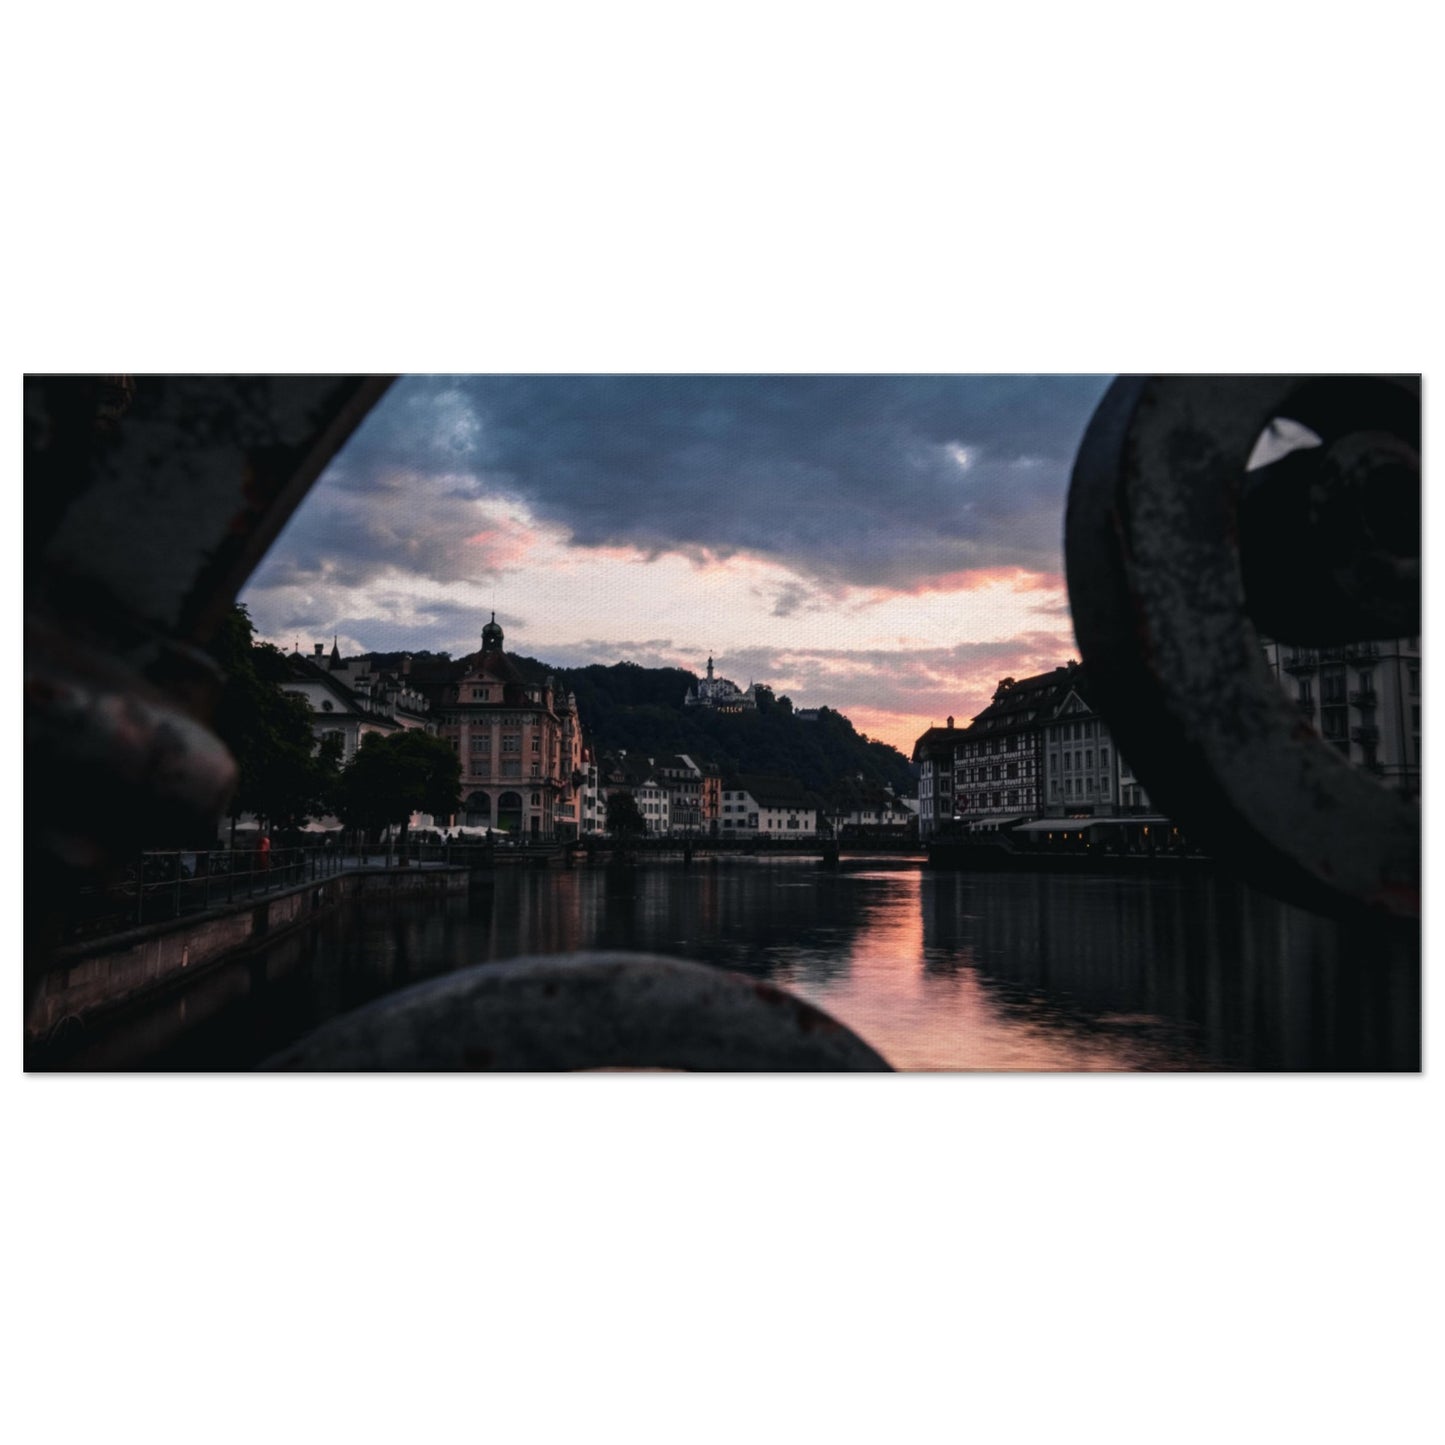 Sunset over Lucerne - canvas print in various sizes